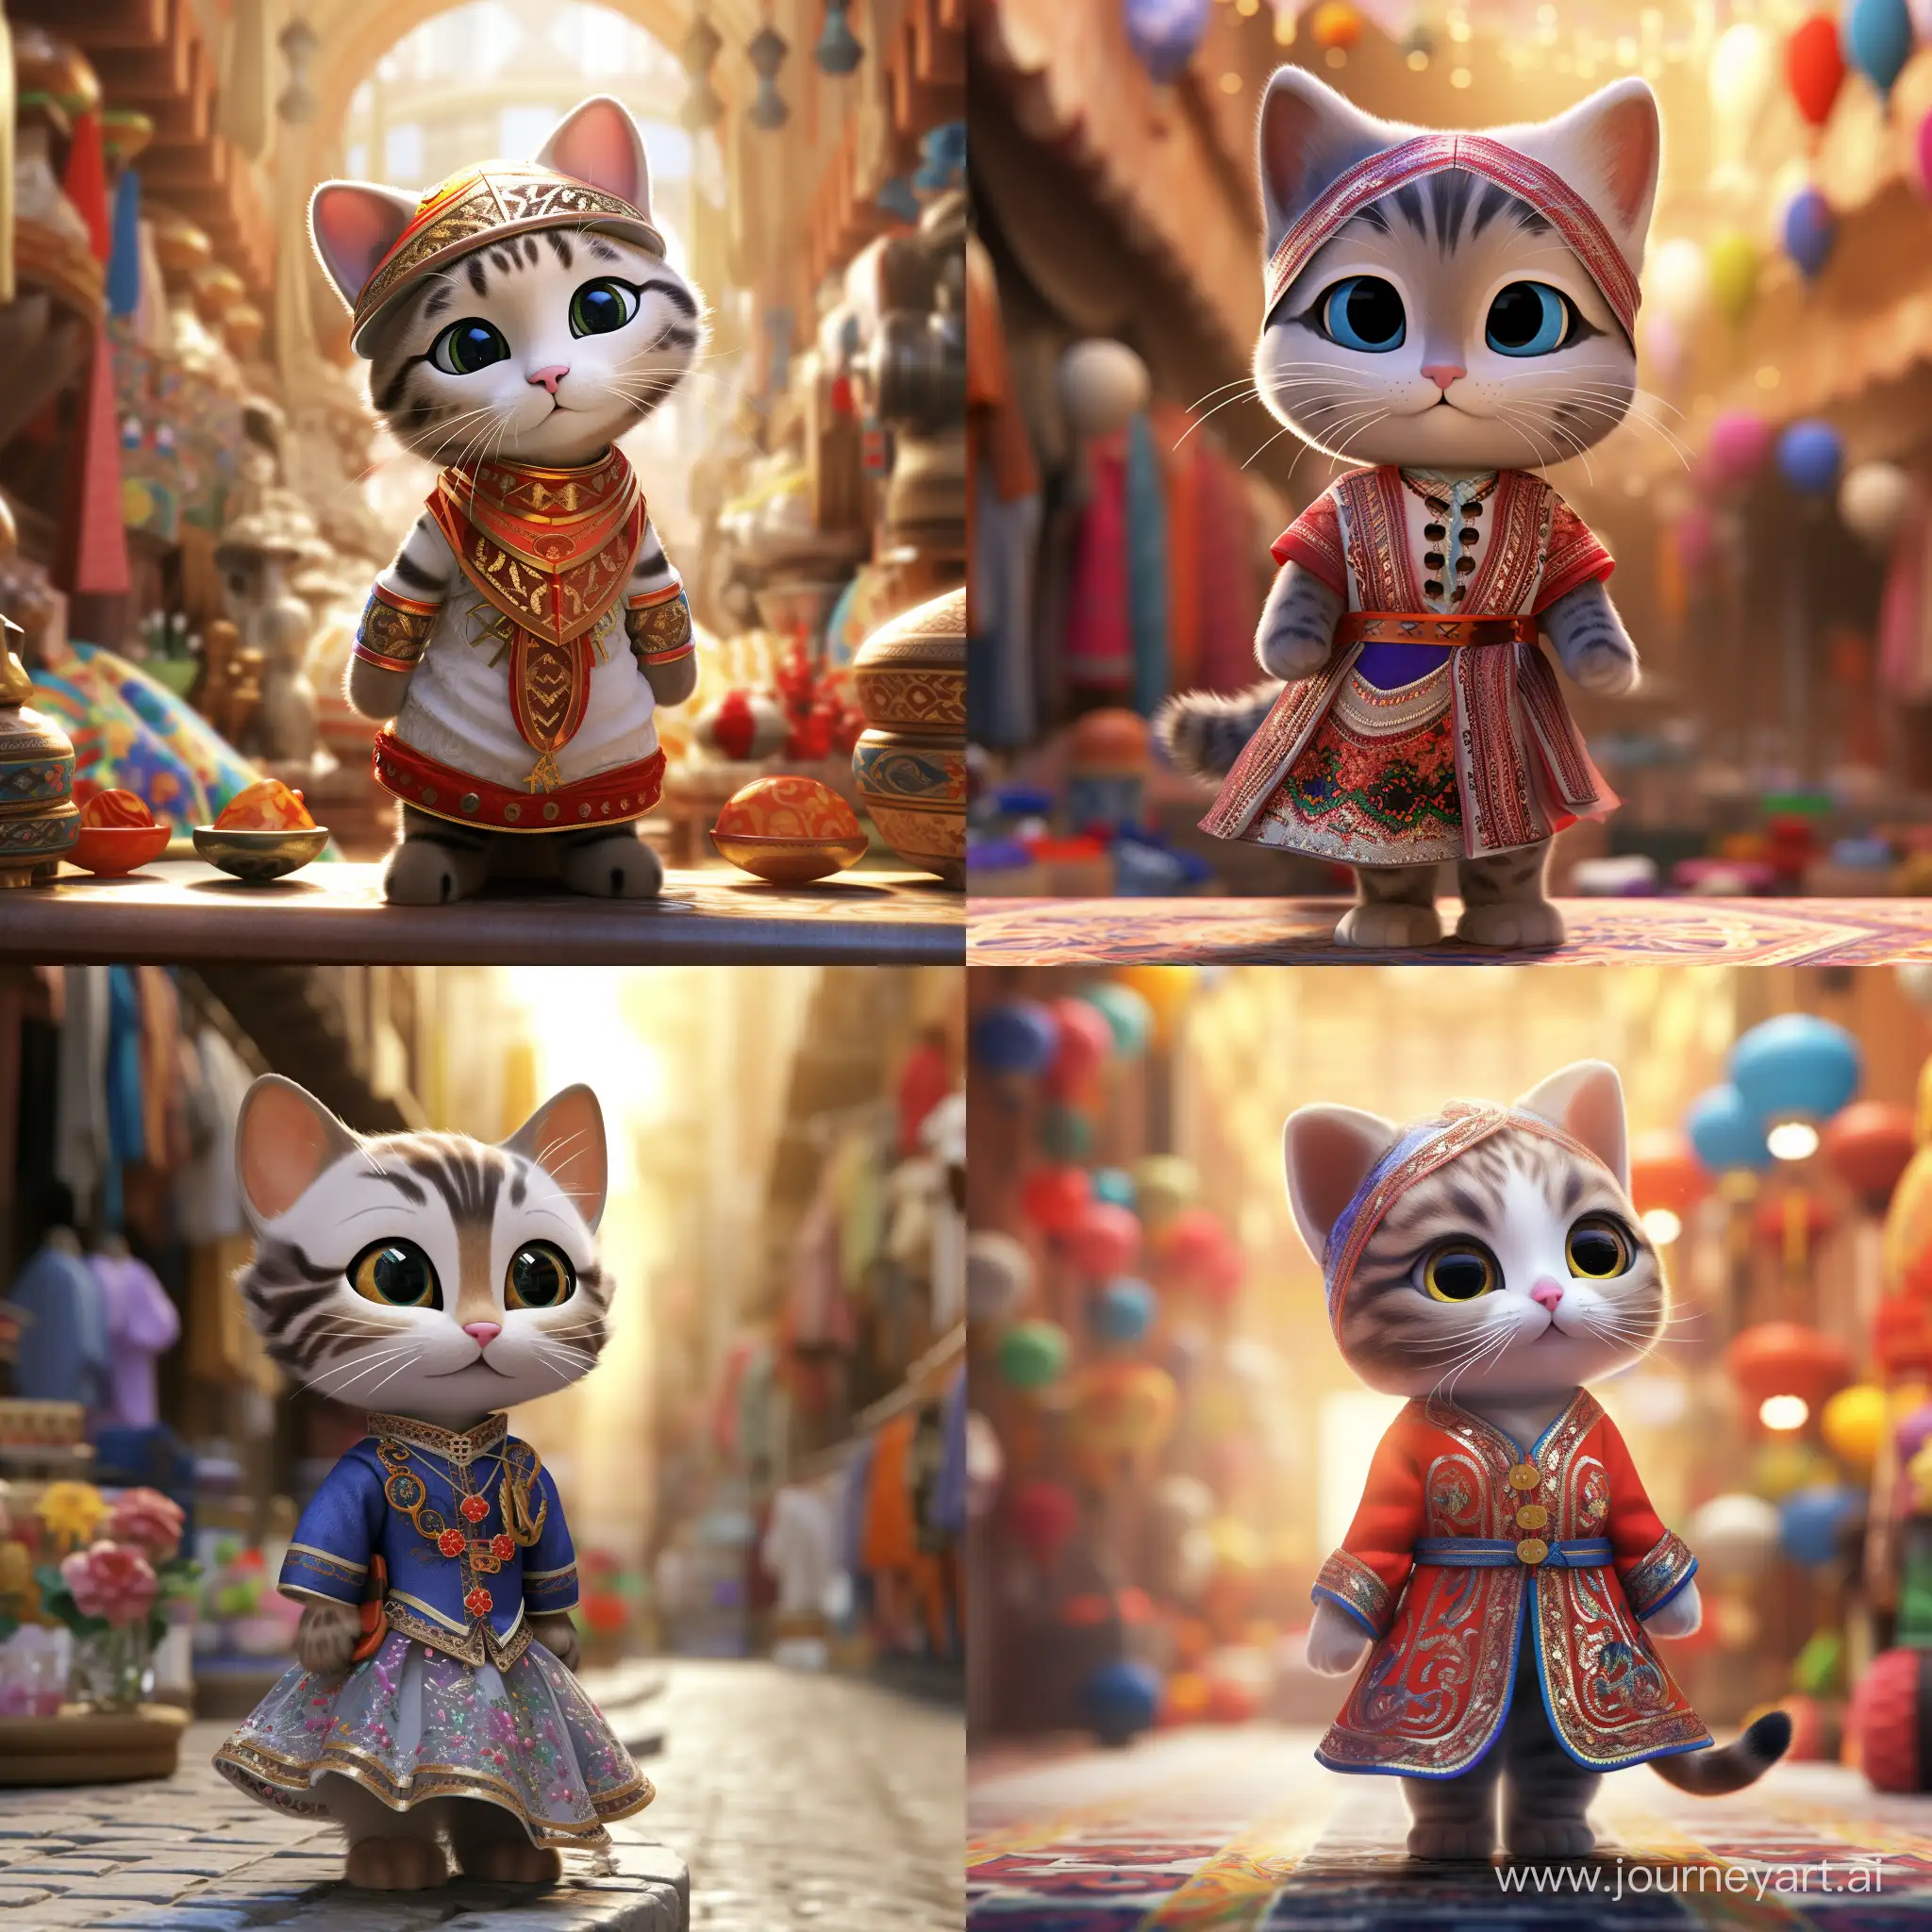 A beautiful Disney Cat, funny big eyes, long moustache, very happy, wearing colorfull traditional Moroccan costume, spring costumes, "2024" is written on the store, traditional Moroccan street, Disney Pixar Animation style, movie lighting, Blurred background, high resolution, 3D, ultra HD 3D rendering best quailty, masterpiece, flat illustration